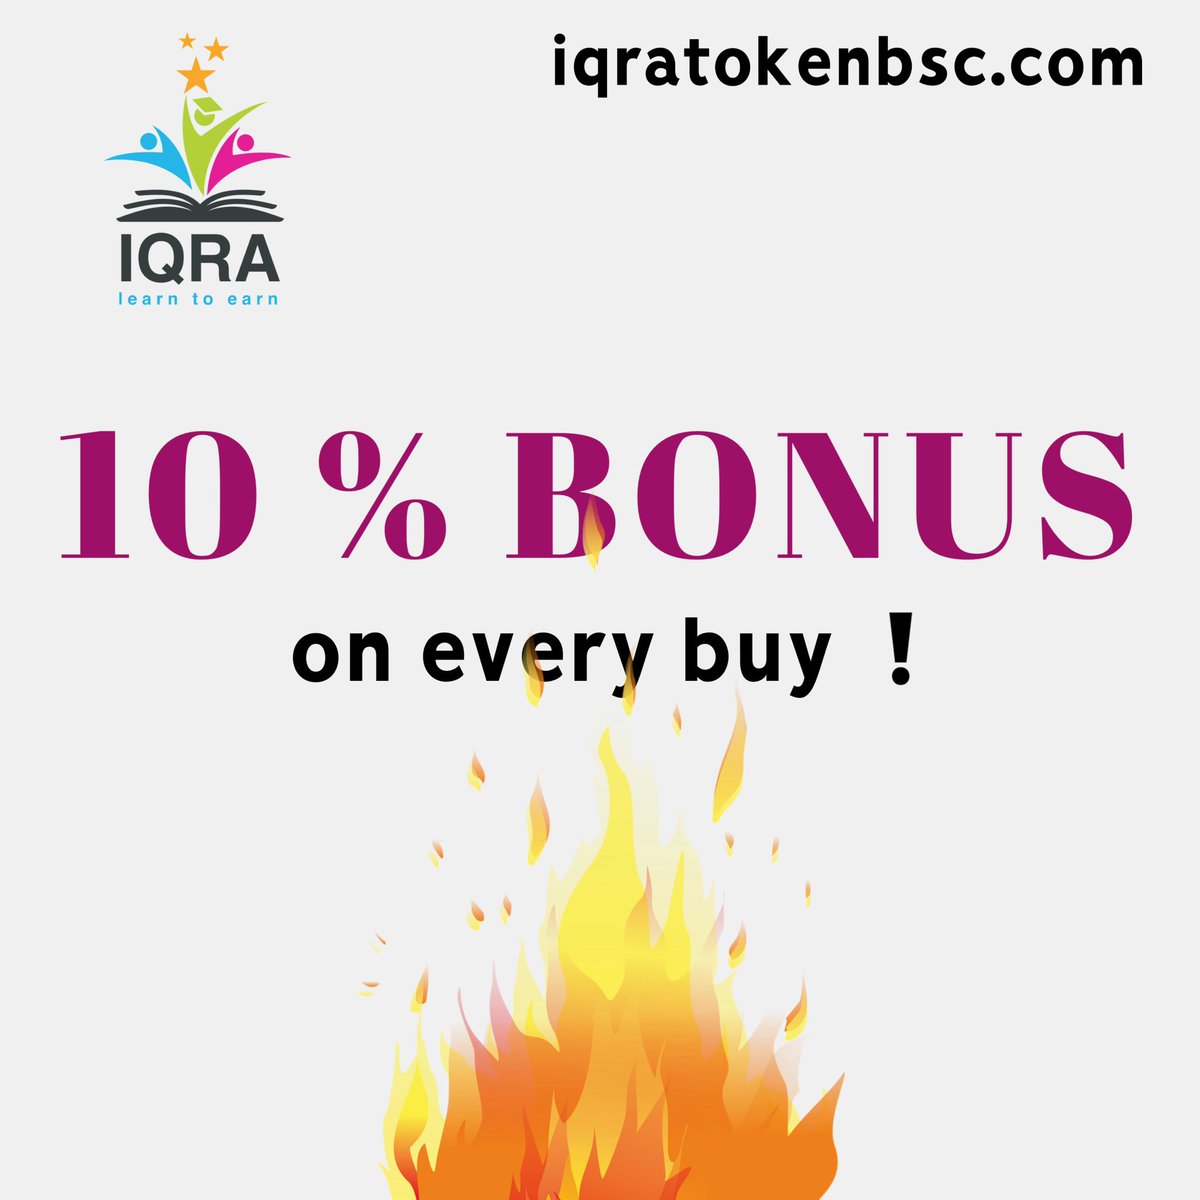 Every buy for the next 48 h gets 10% bonus 🔥🚀

Buy here: pancakeswap.finance/swap?outputCur…

#IQRA #BlockchainEducation
#Altcoingems #AltCoinSeason2024 #Bitcoin    #Crypto #EducationReform #EducationMatters #NFTCollection #nft #education